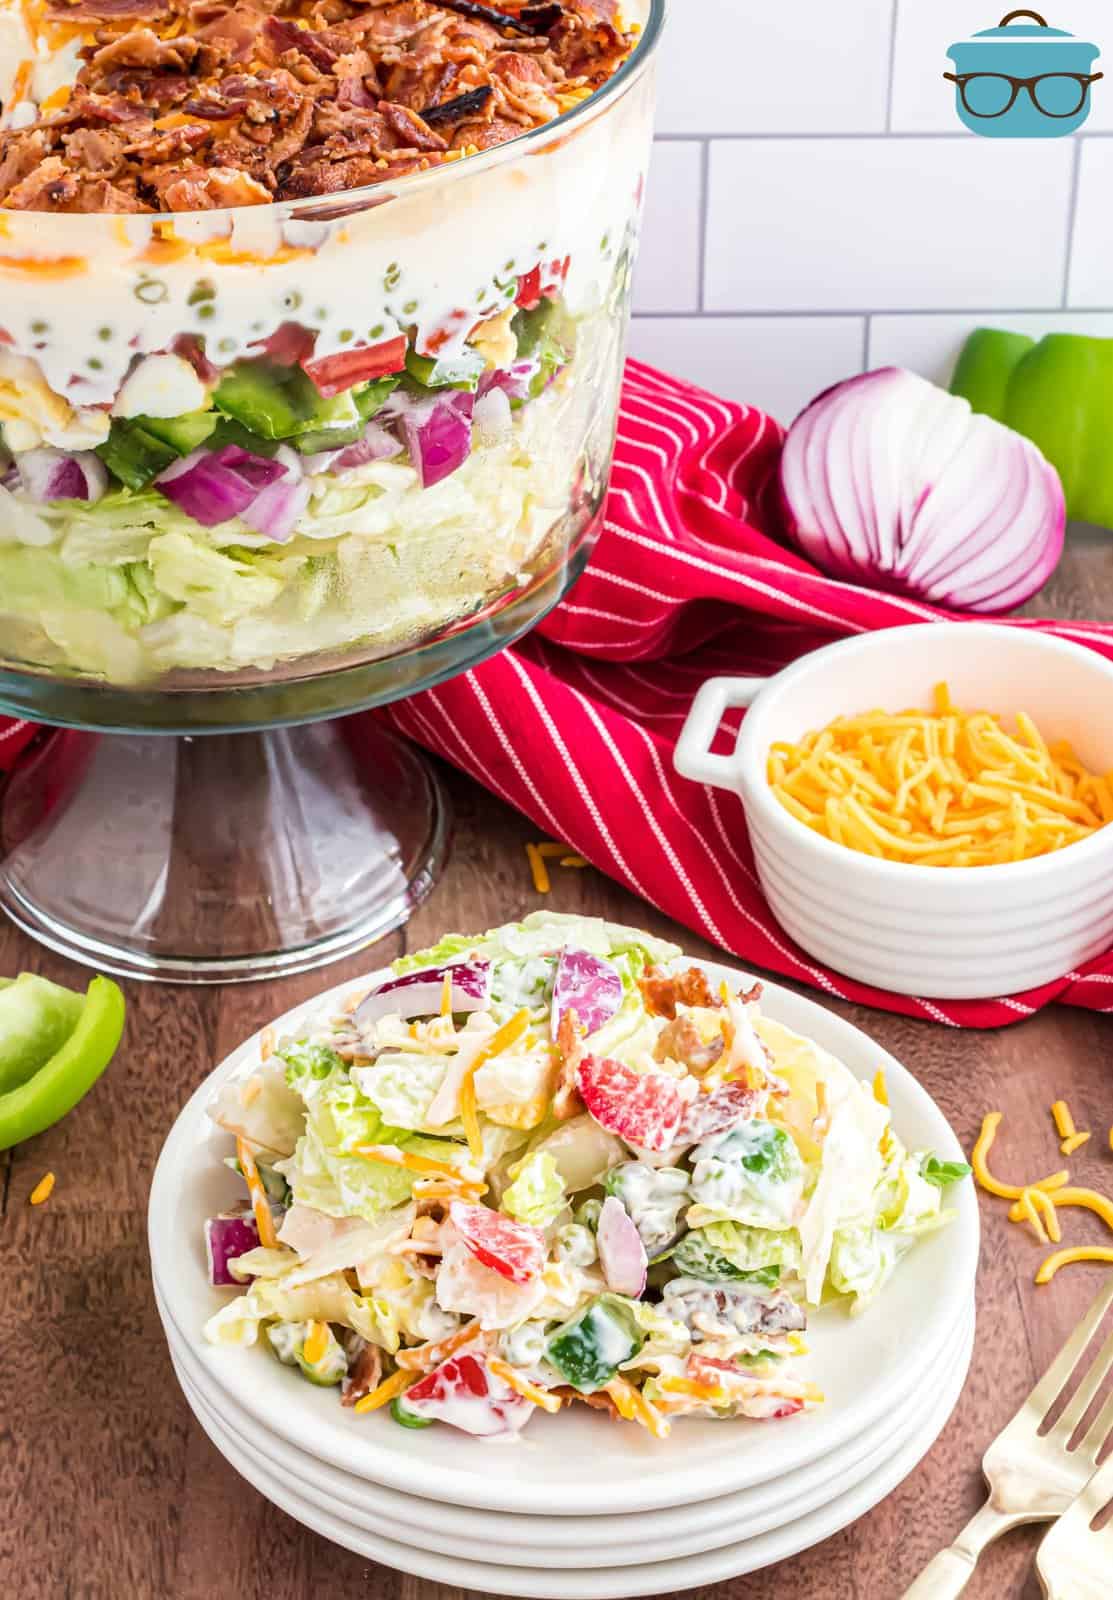 Seven Layer Salad scooped onto white plate with bowl of salad in background.